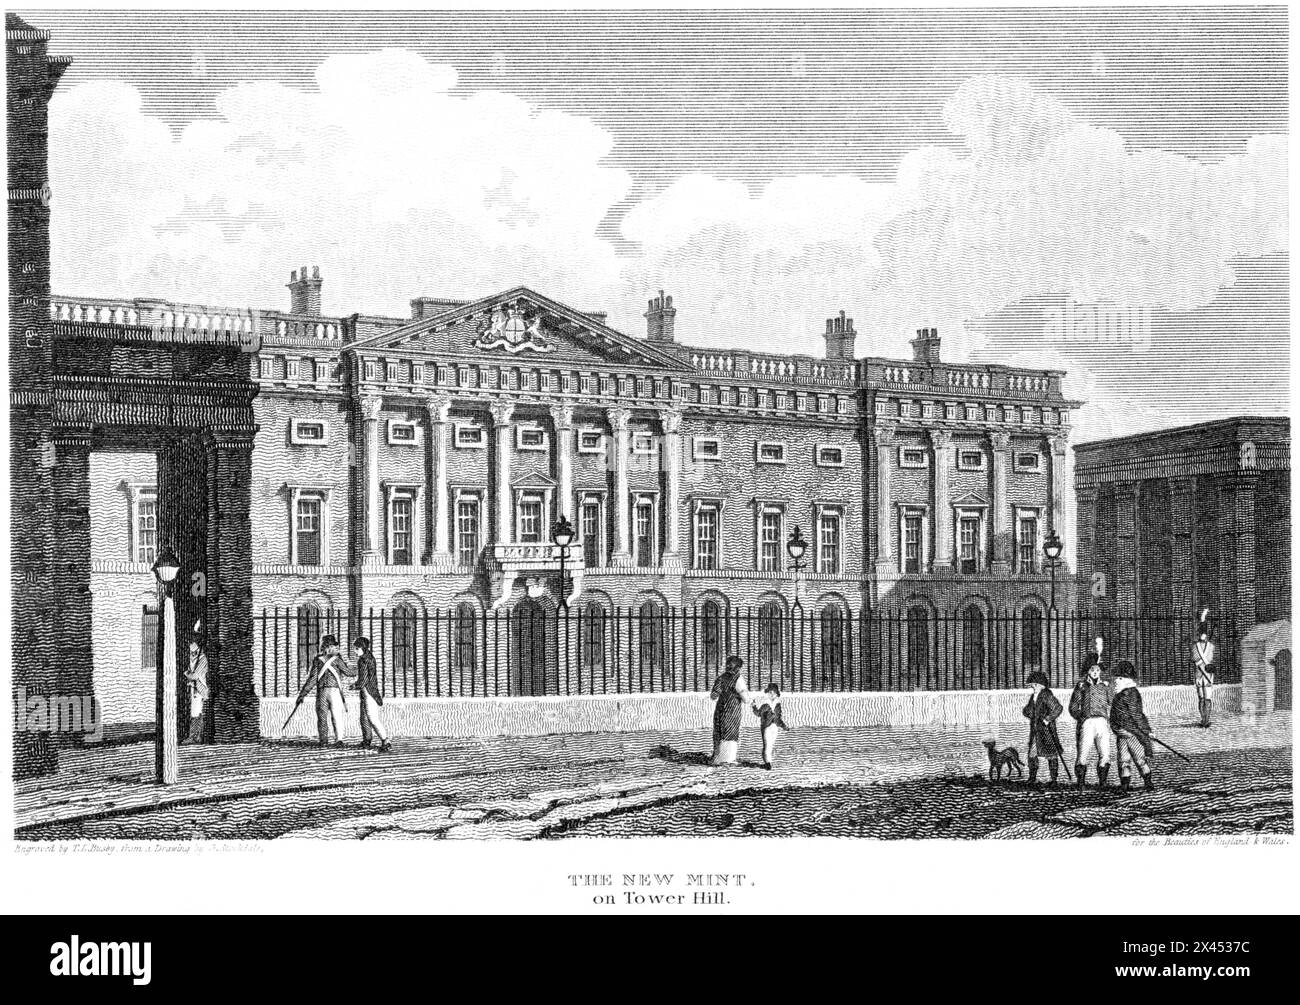 An engraving entitled The New Mint on Tower Hill, London UK scanned at high resolution from a book published around 1815.  Believed copyright free. Stock Photo